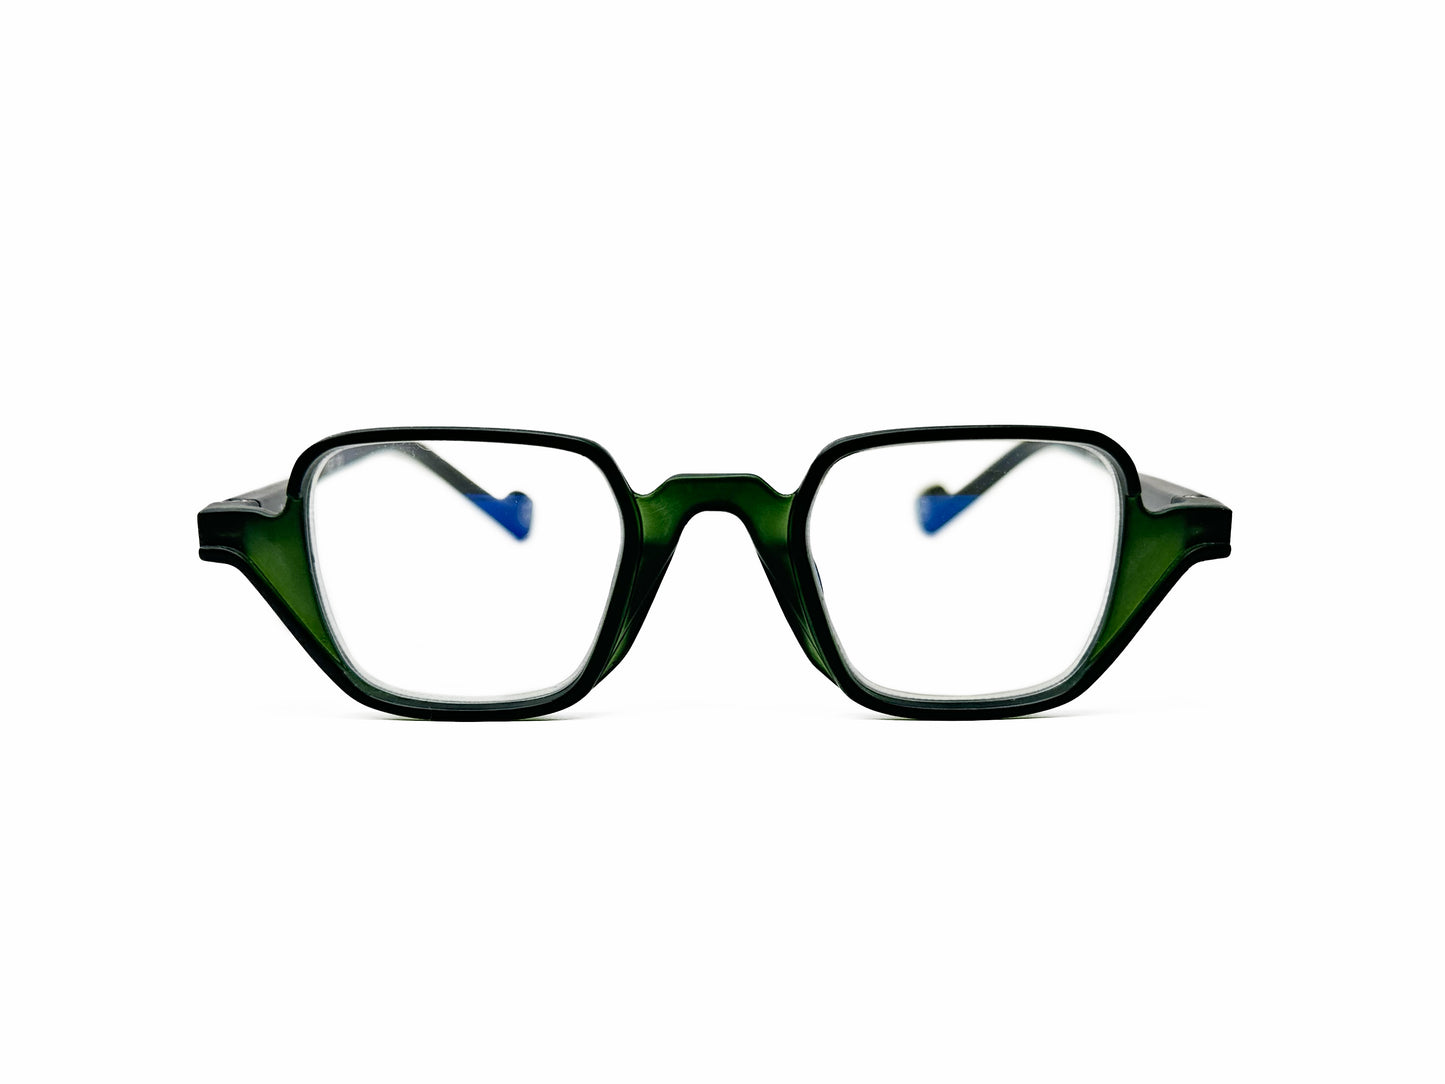 Aptica square acetate reader. Model: Lector. Color: Bottle Green. Front view.